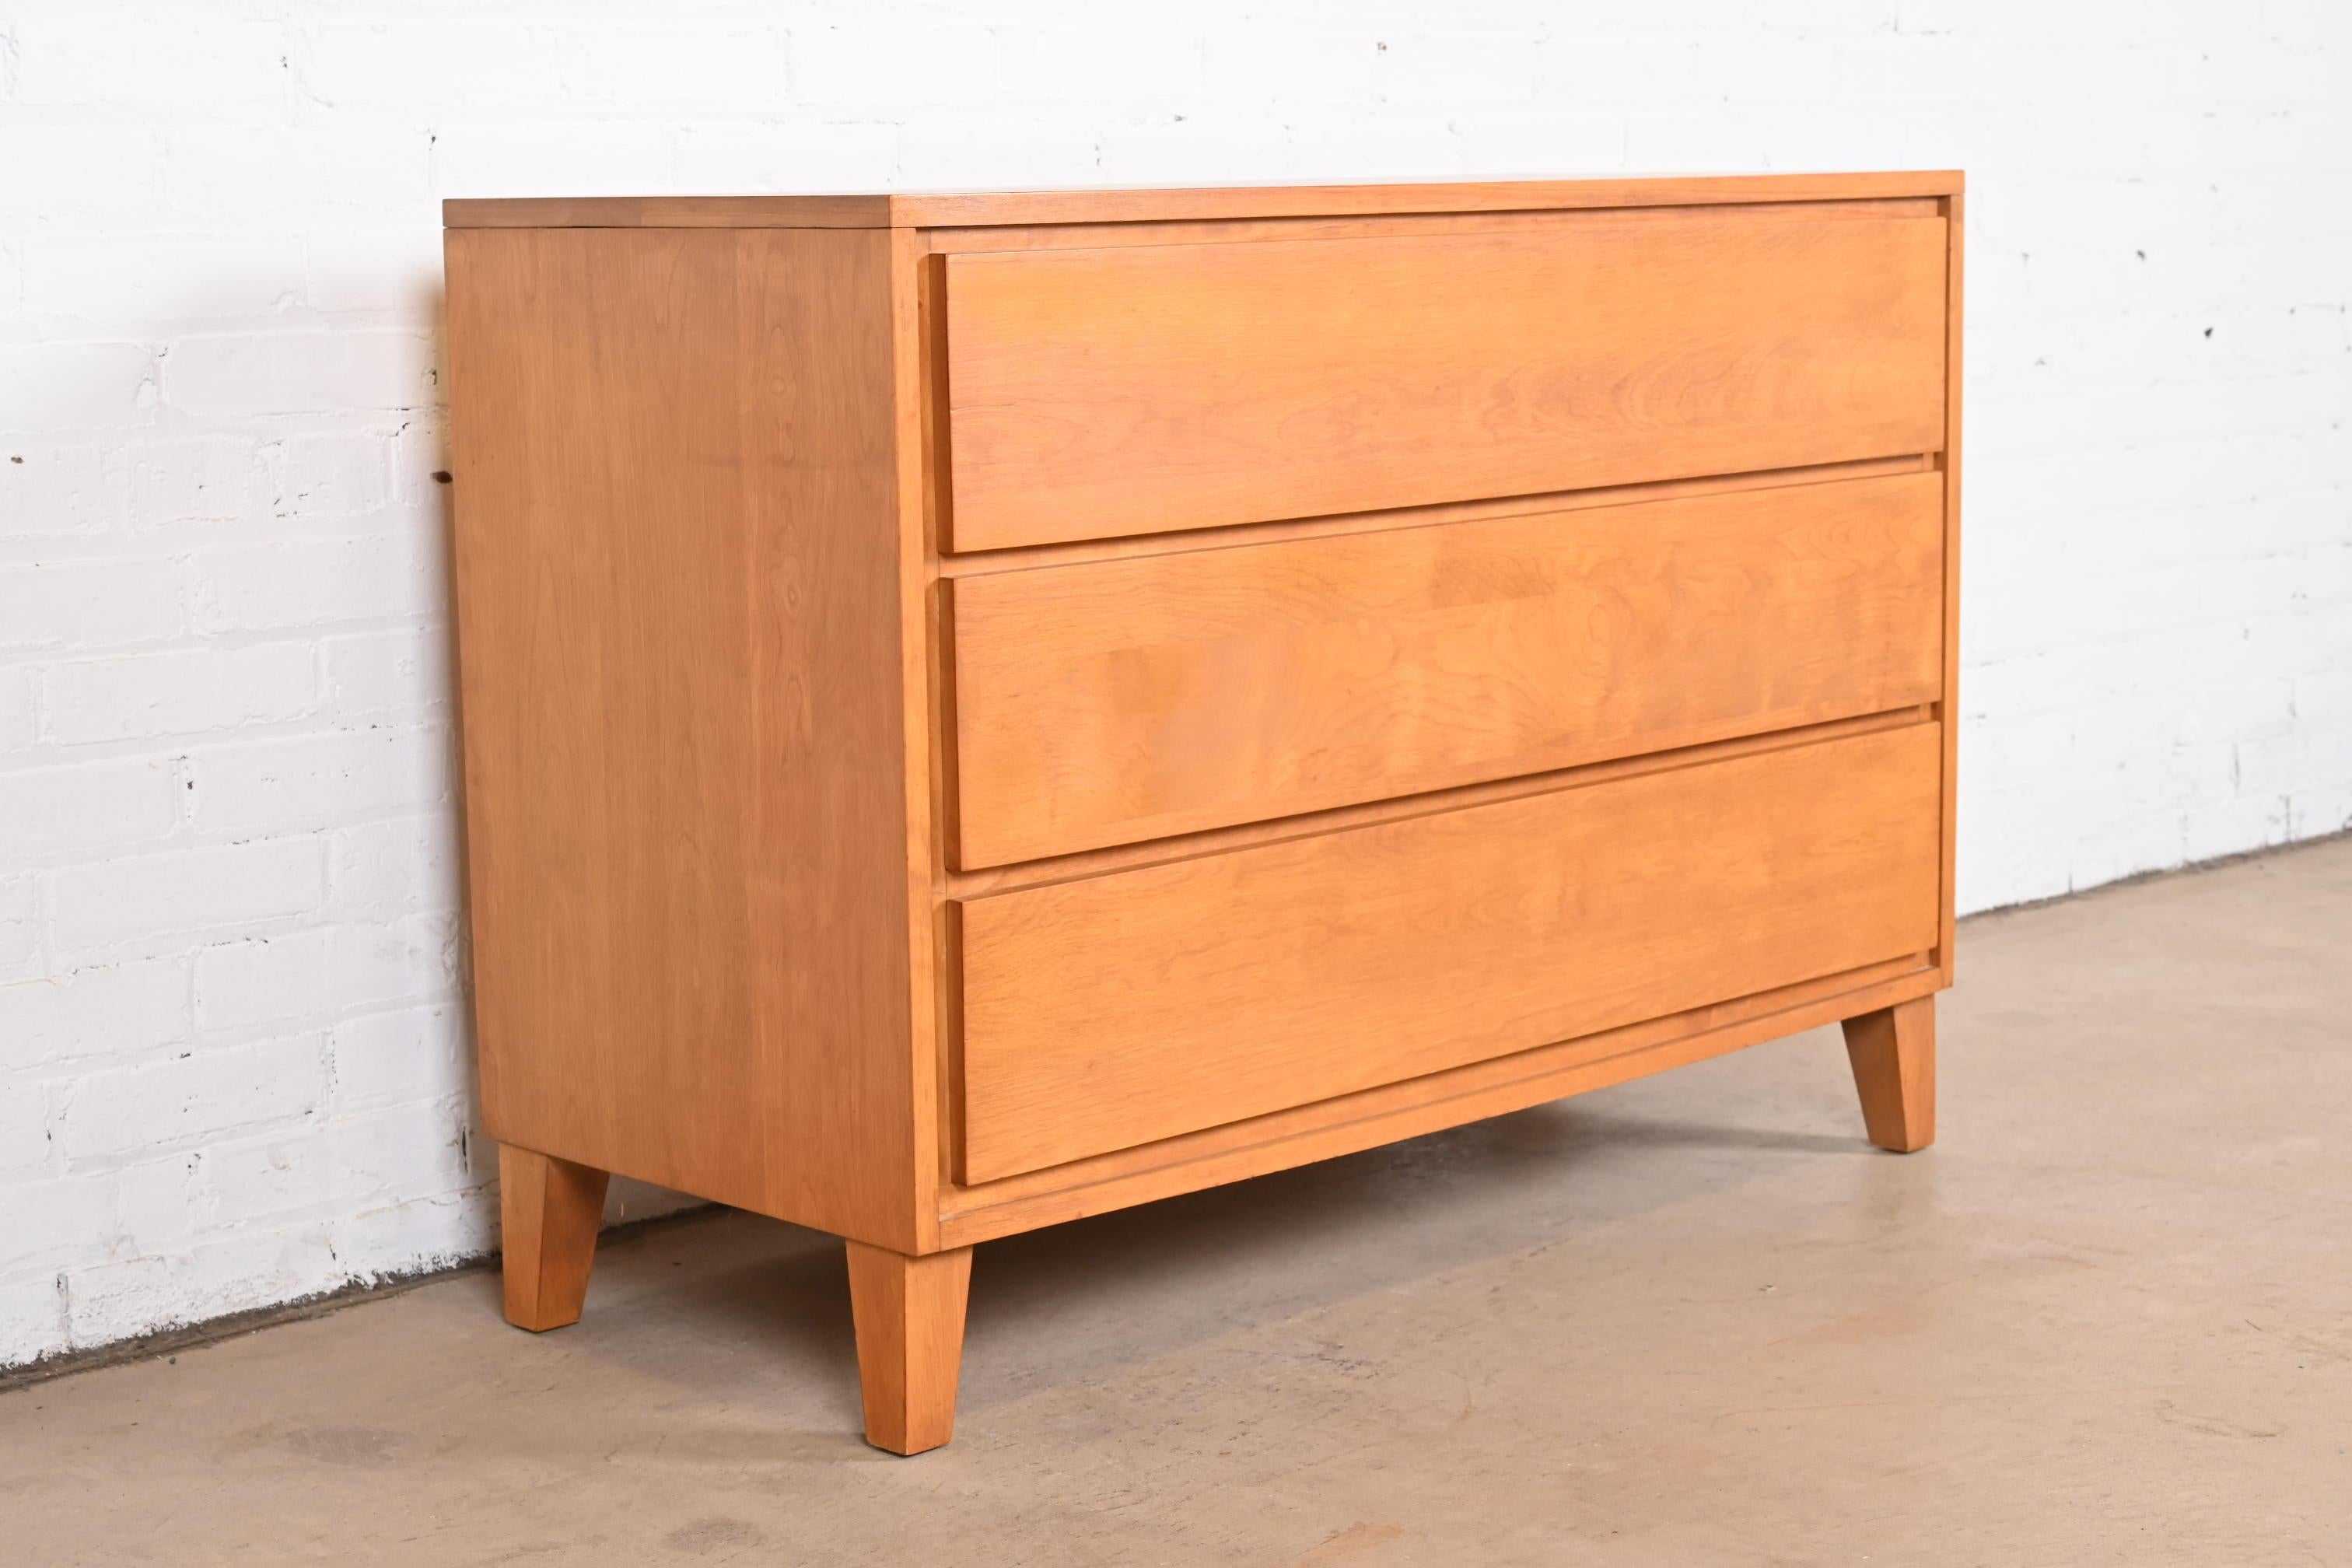 An exceptional Mid-Century Modern three-drawer solid birch dresser or chest of drawers

By Leslie Diamond for Conant Ball, 